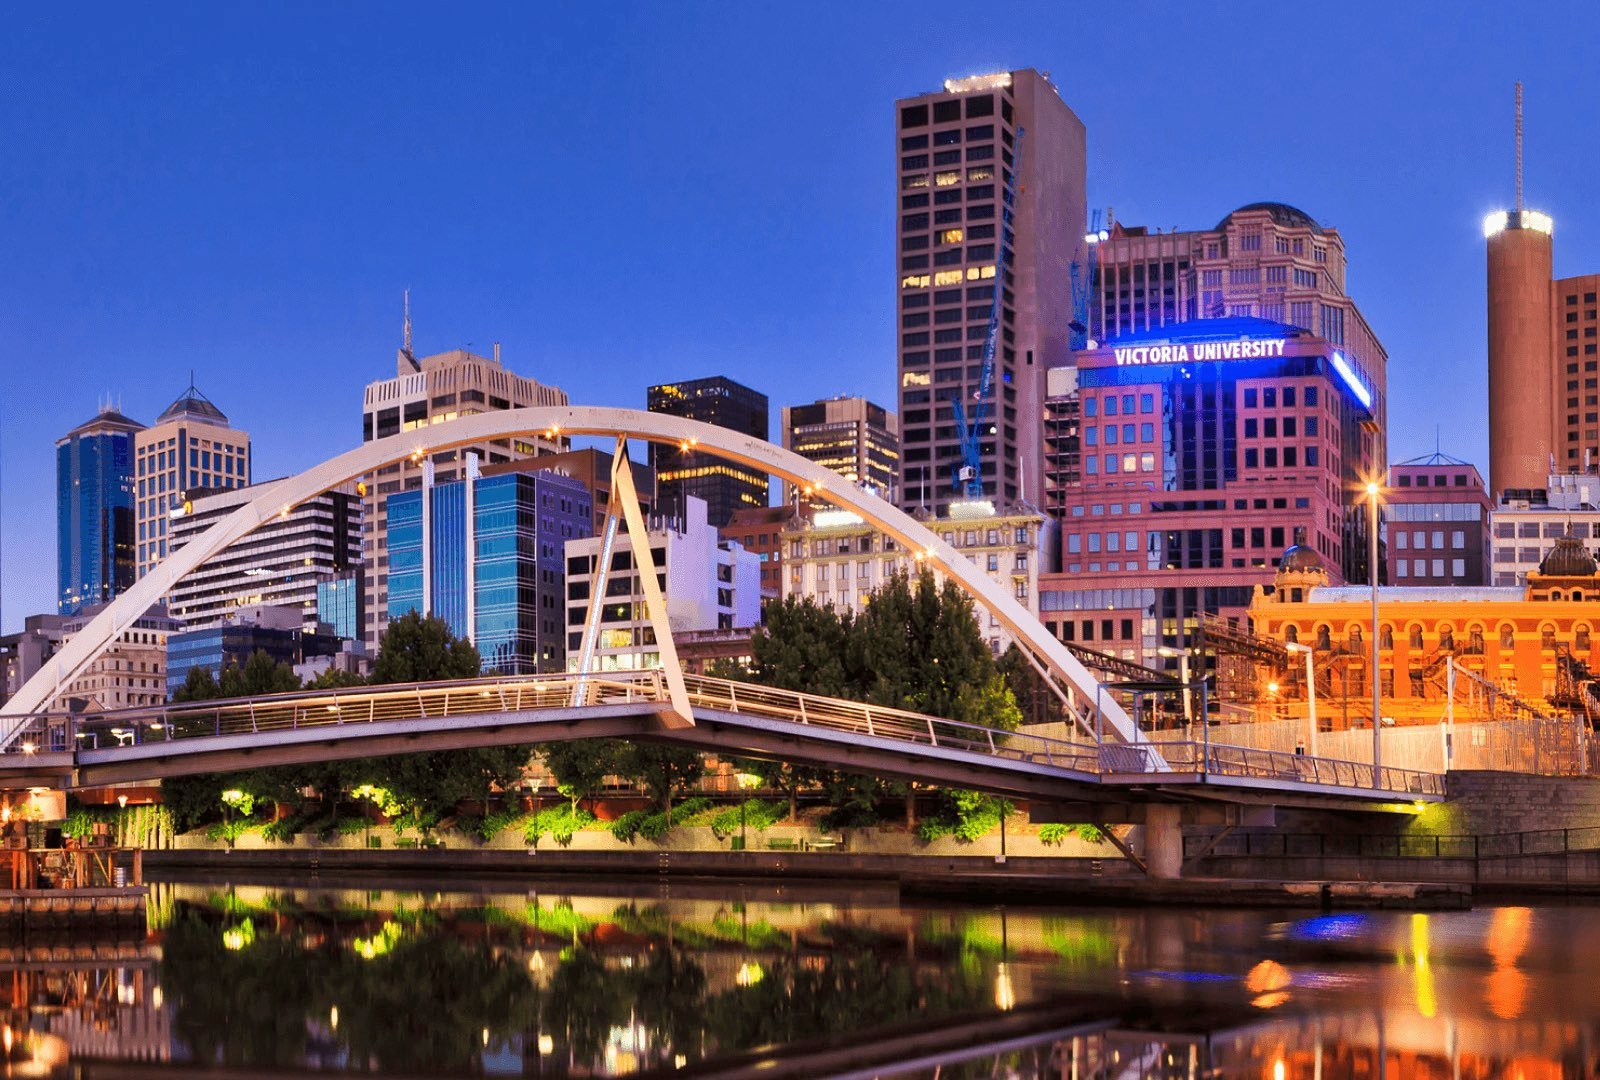 Cityscape of Melbourne behind a bridge with a neon blue Victoria University sign glowing atop a building.